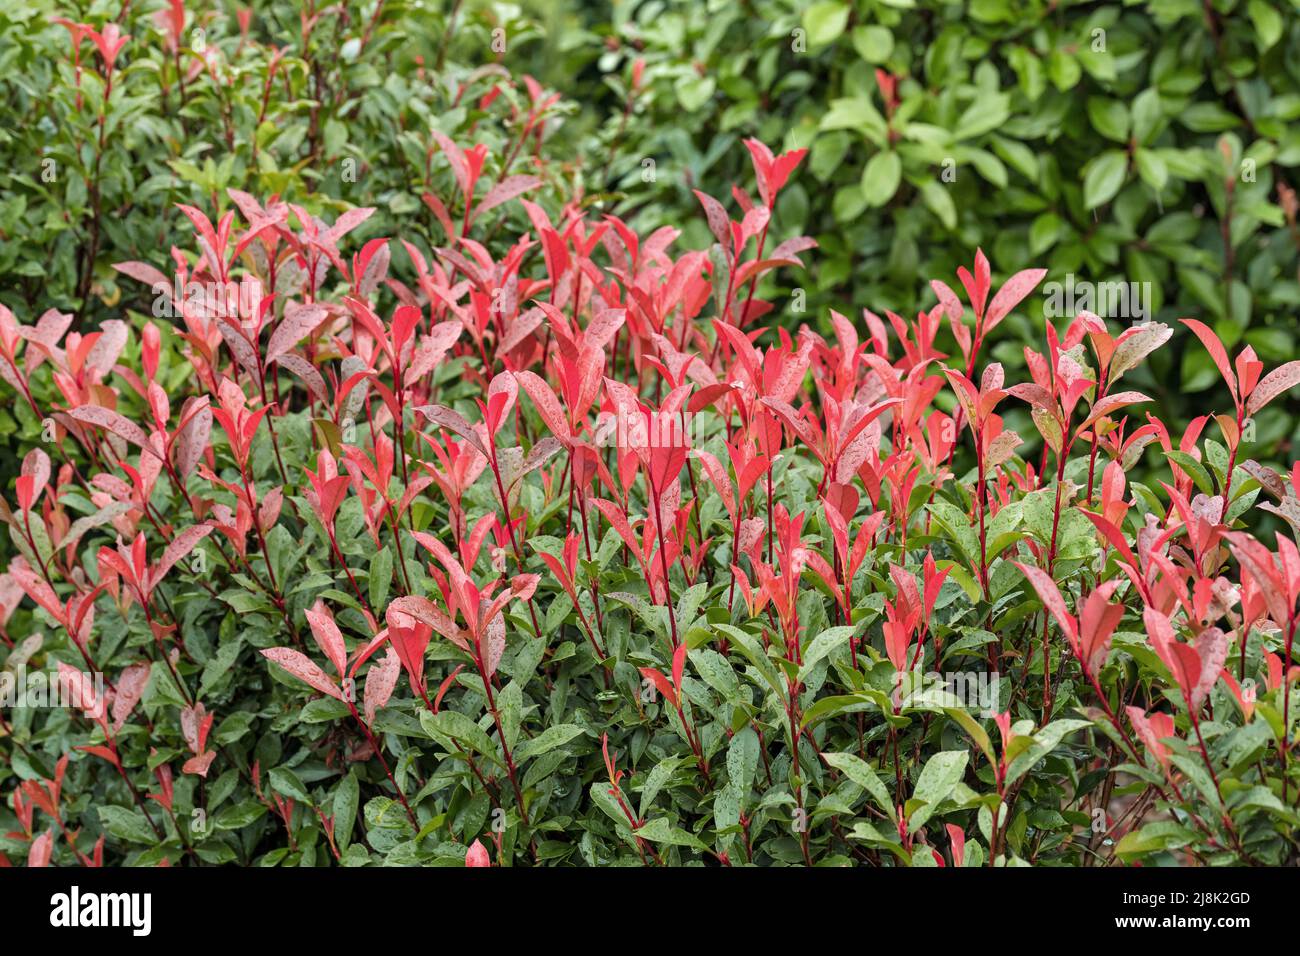 Fraser photinia (Photinia x fraseri 'Carre Rouge', Photinia x fraseri Carre Rouge, Photinia fraseri), leaf shoots of cultivar Carre Rouge Stock Photo